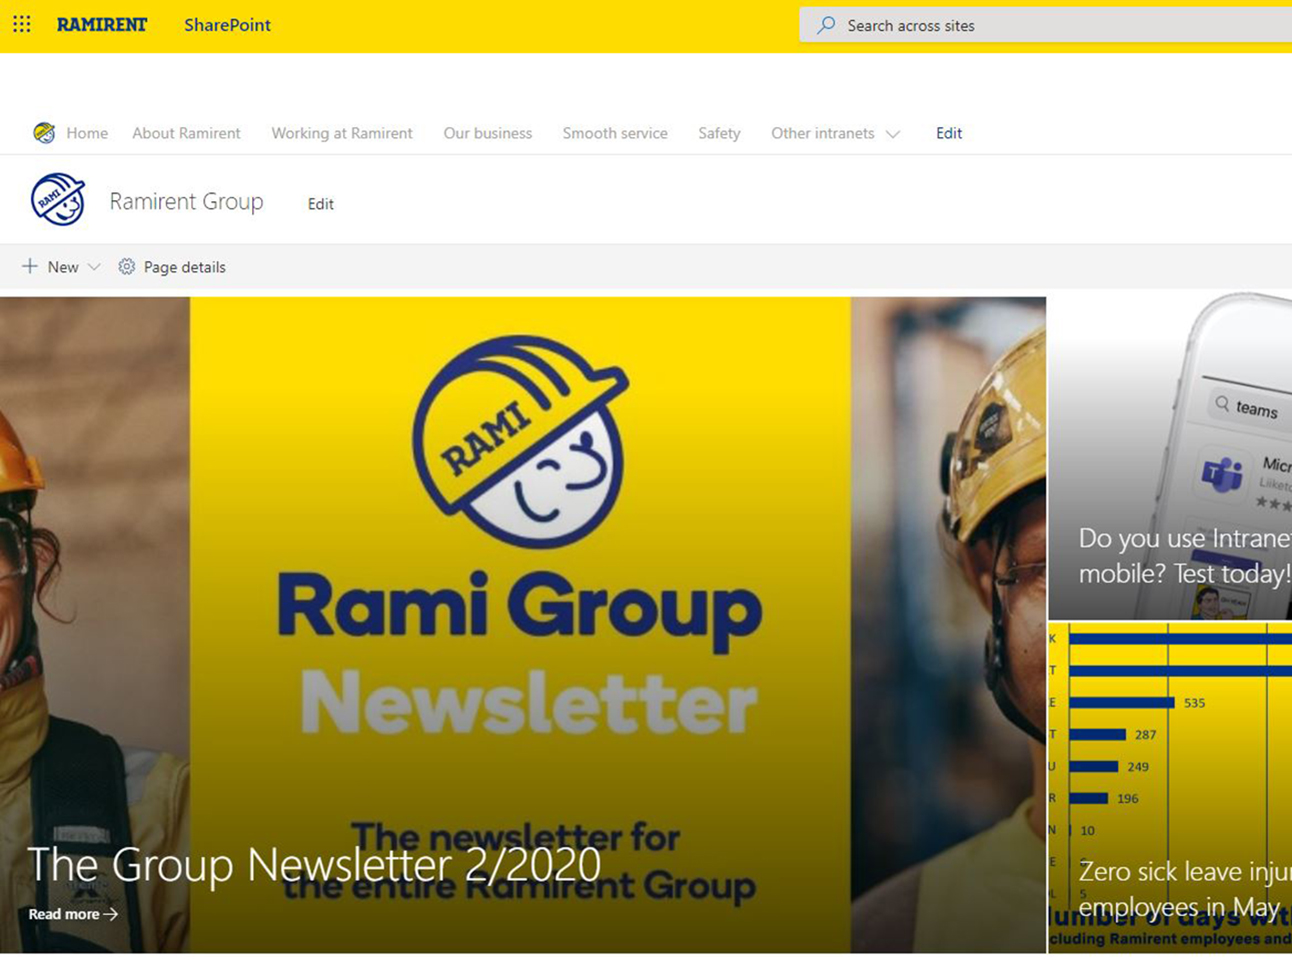 Ramirent's modern intranet is fresh and easy to use.